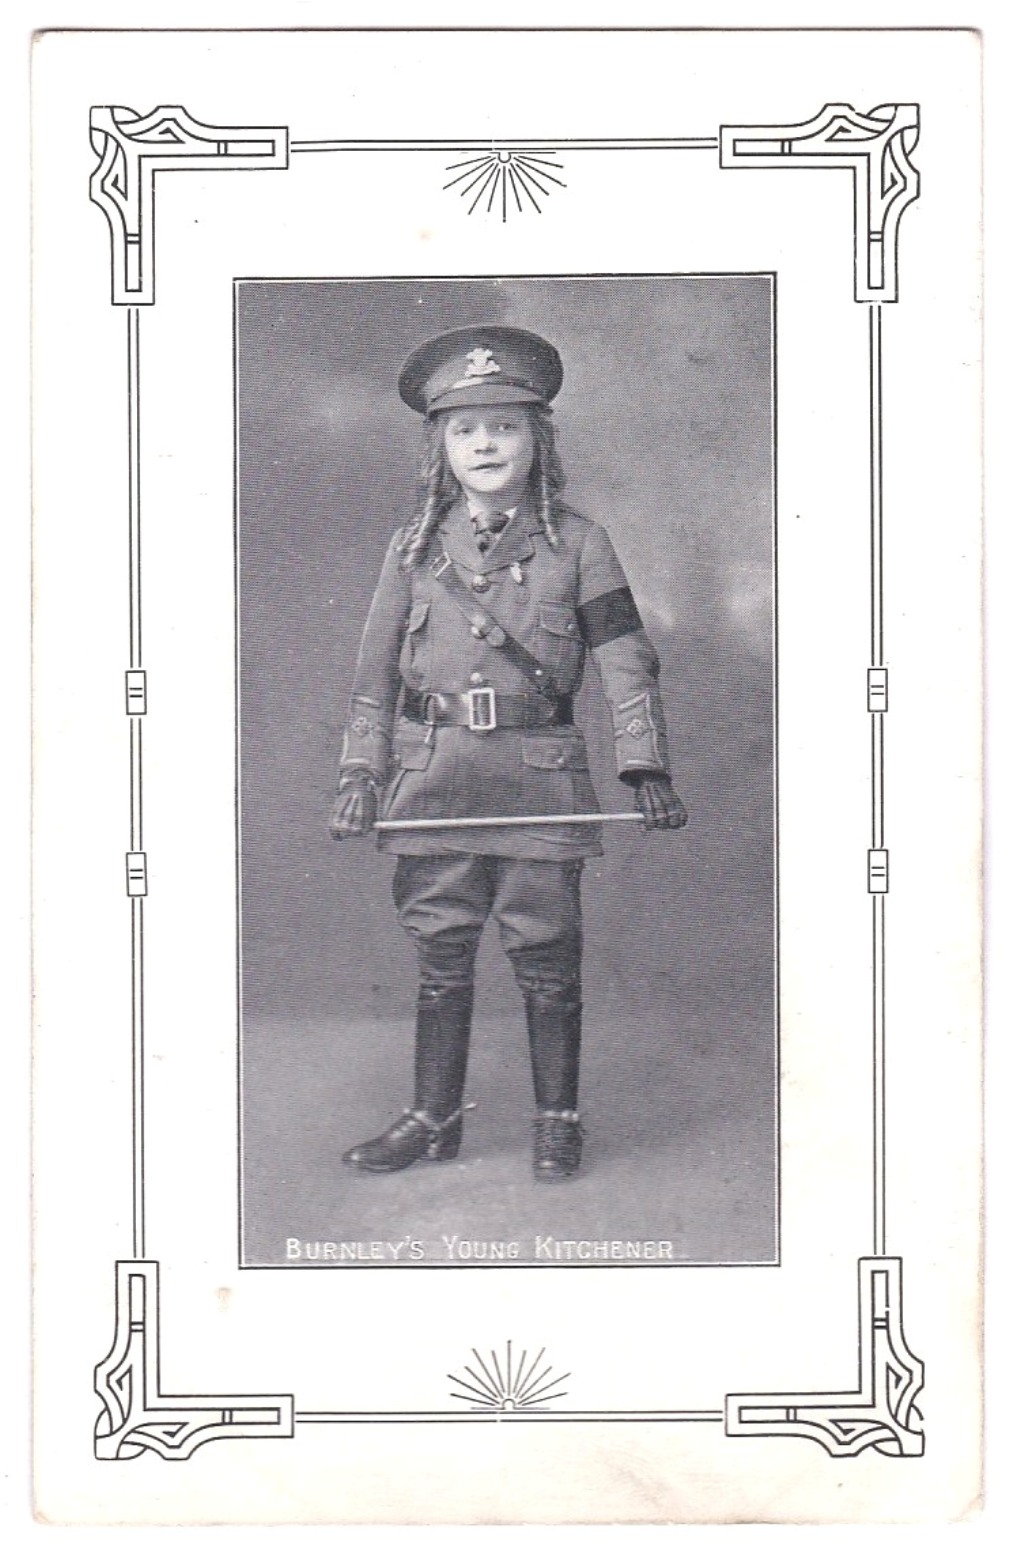 Burney's Young Kitchener photo postcard of a young girl in full service dress-unusual